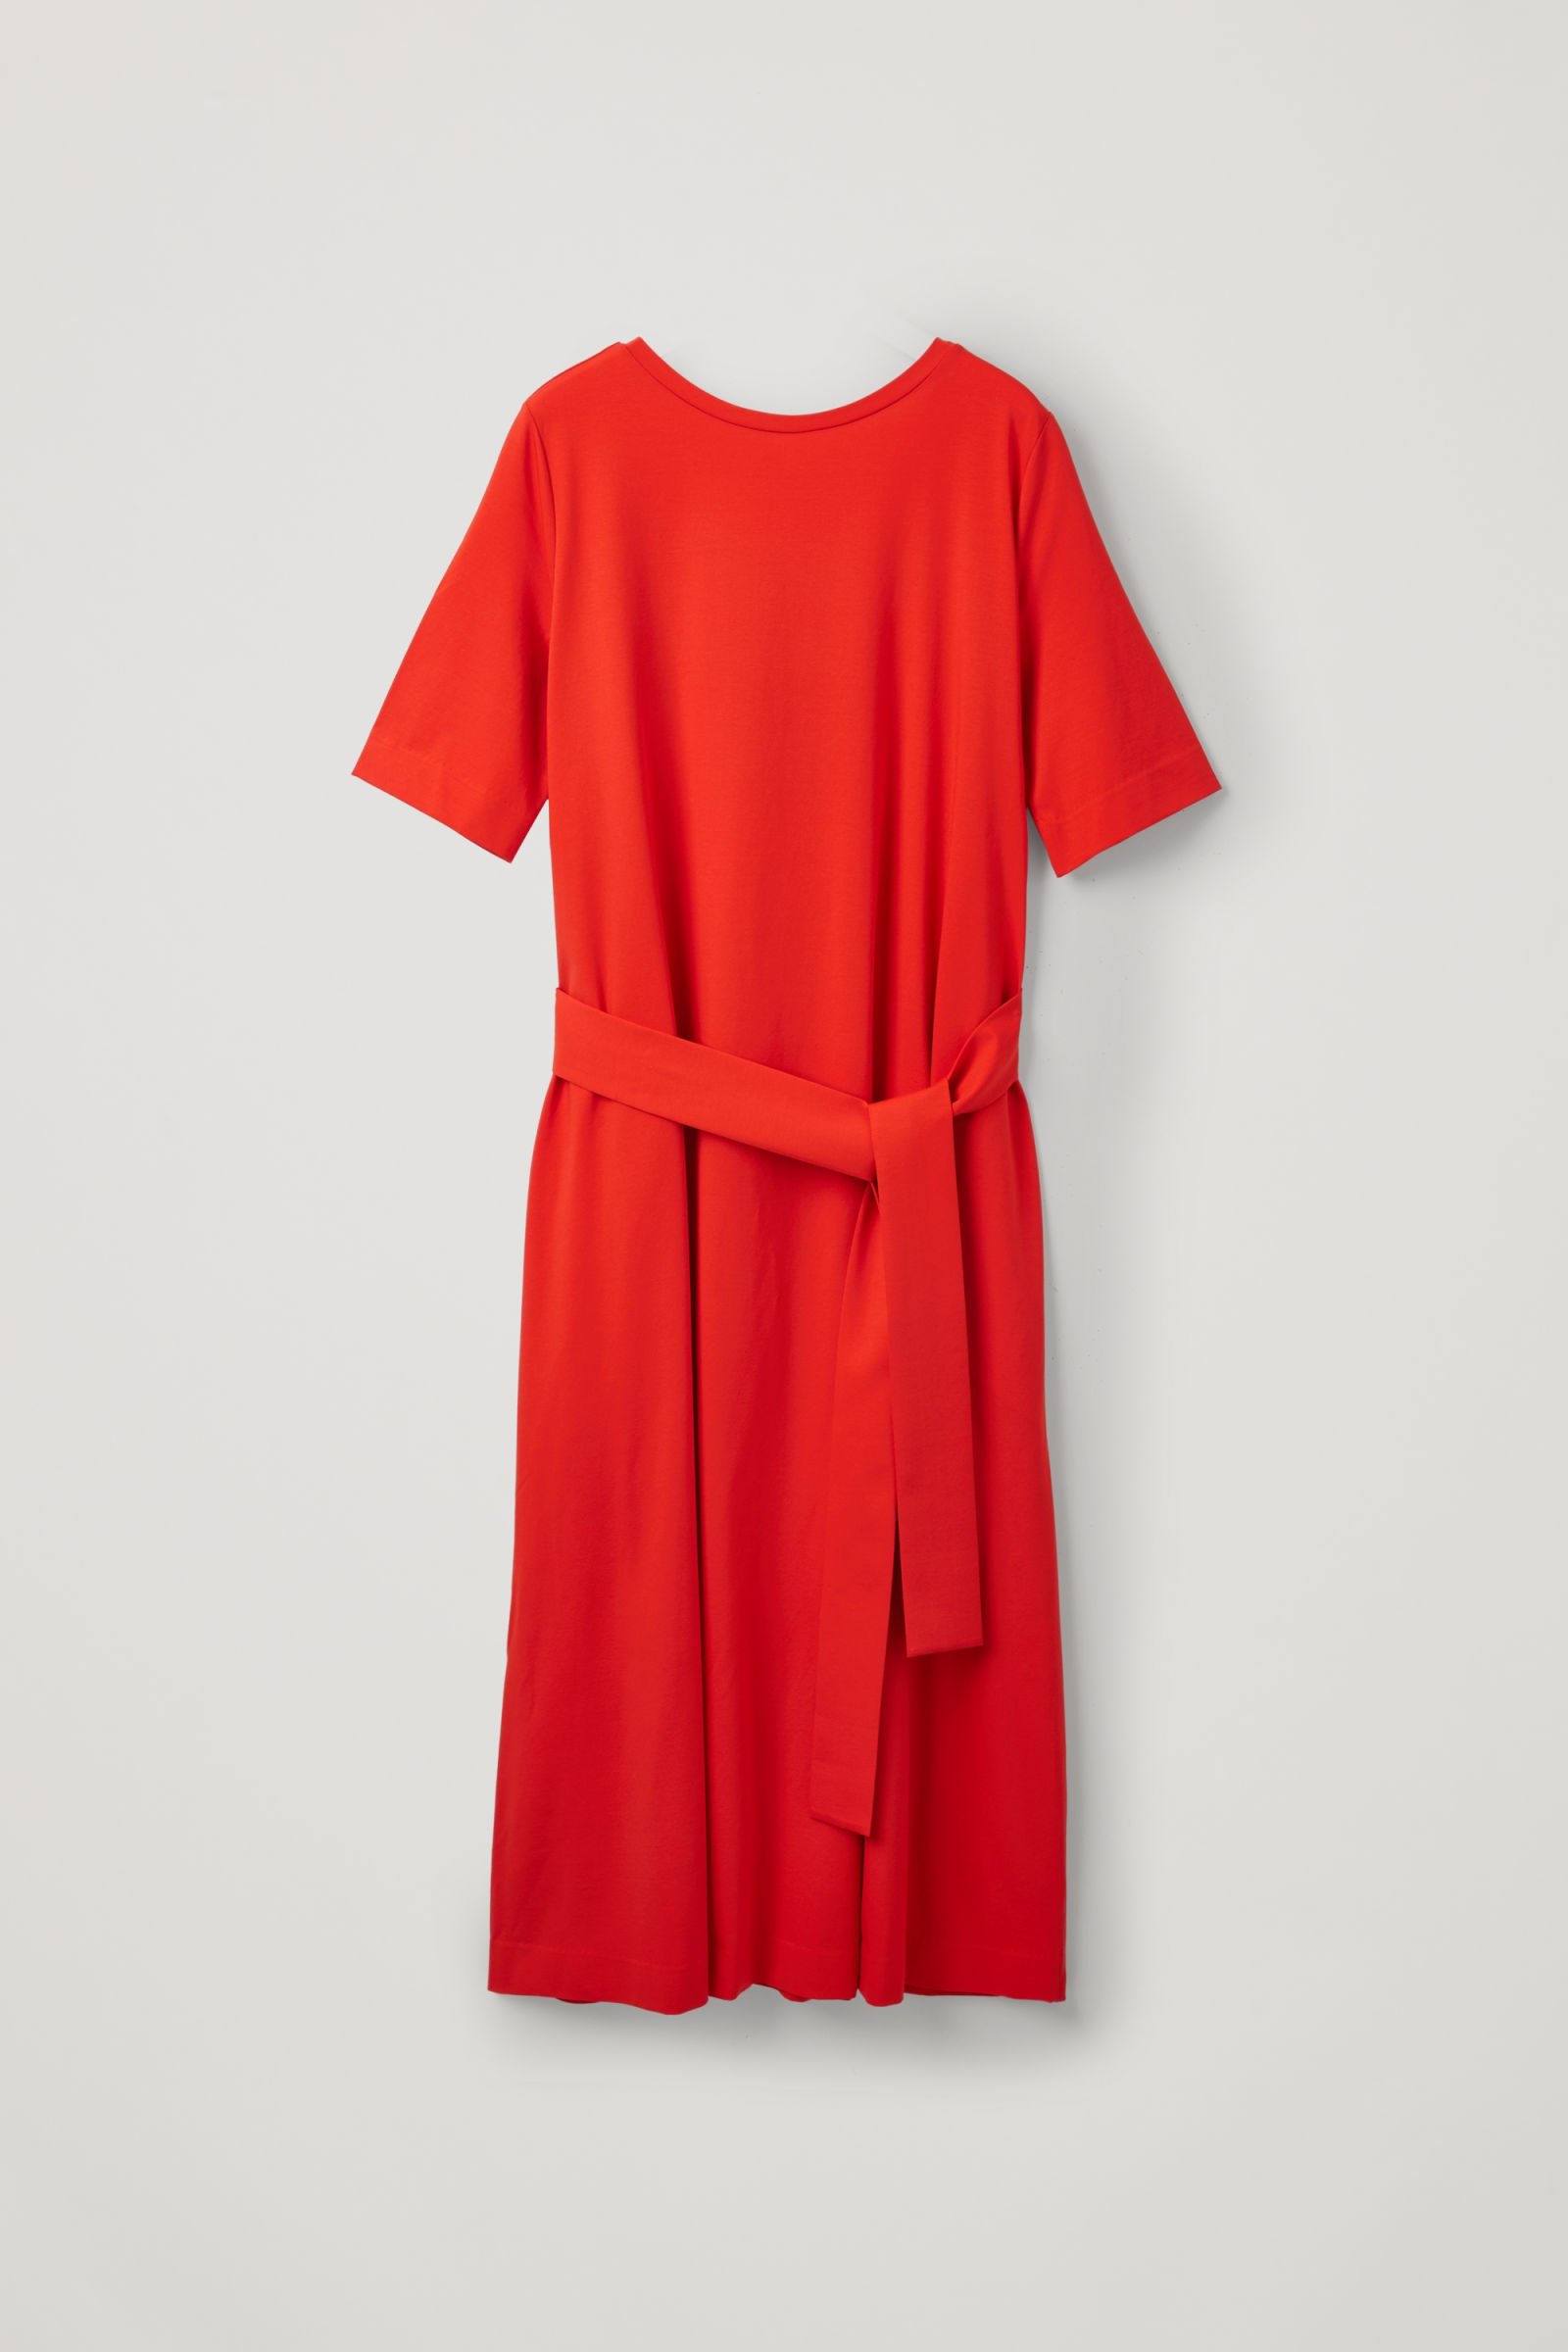 COS Long A-Line Jersey Dress in Vibrant red | Endource